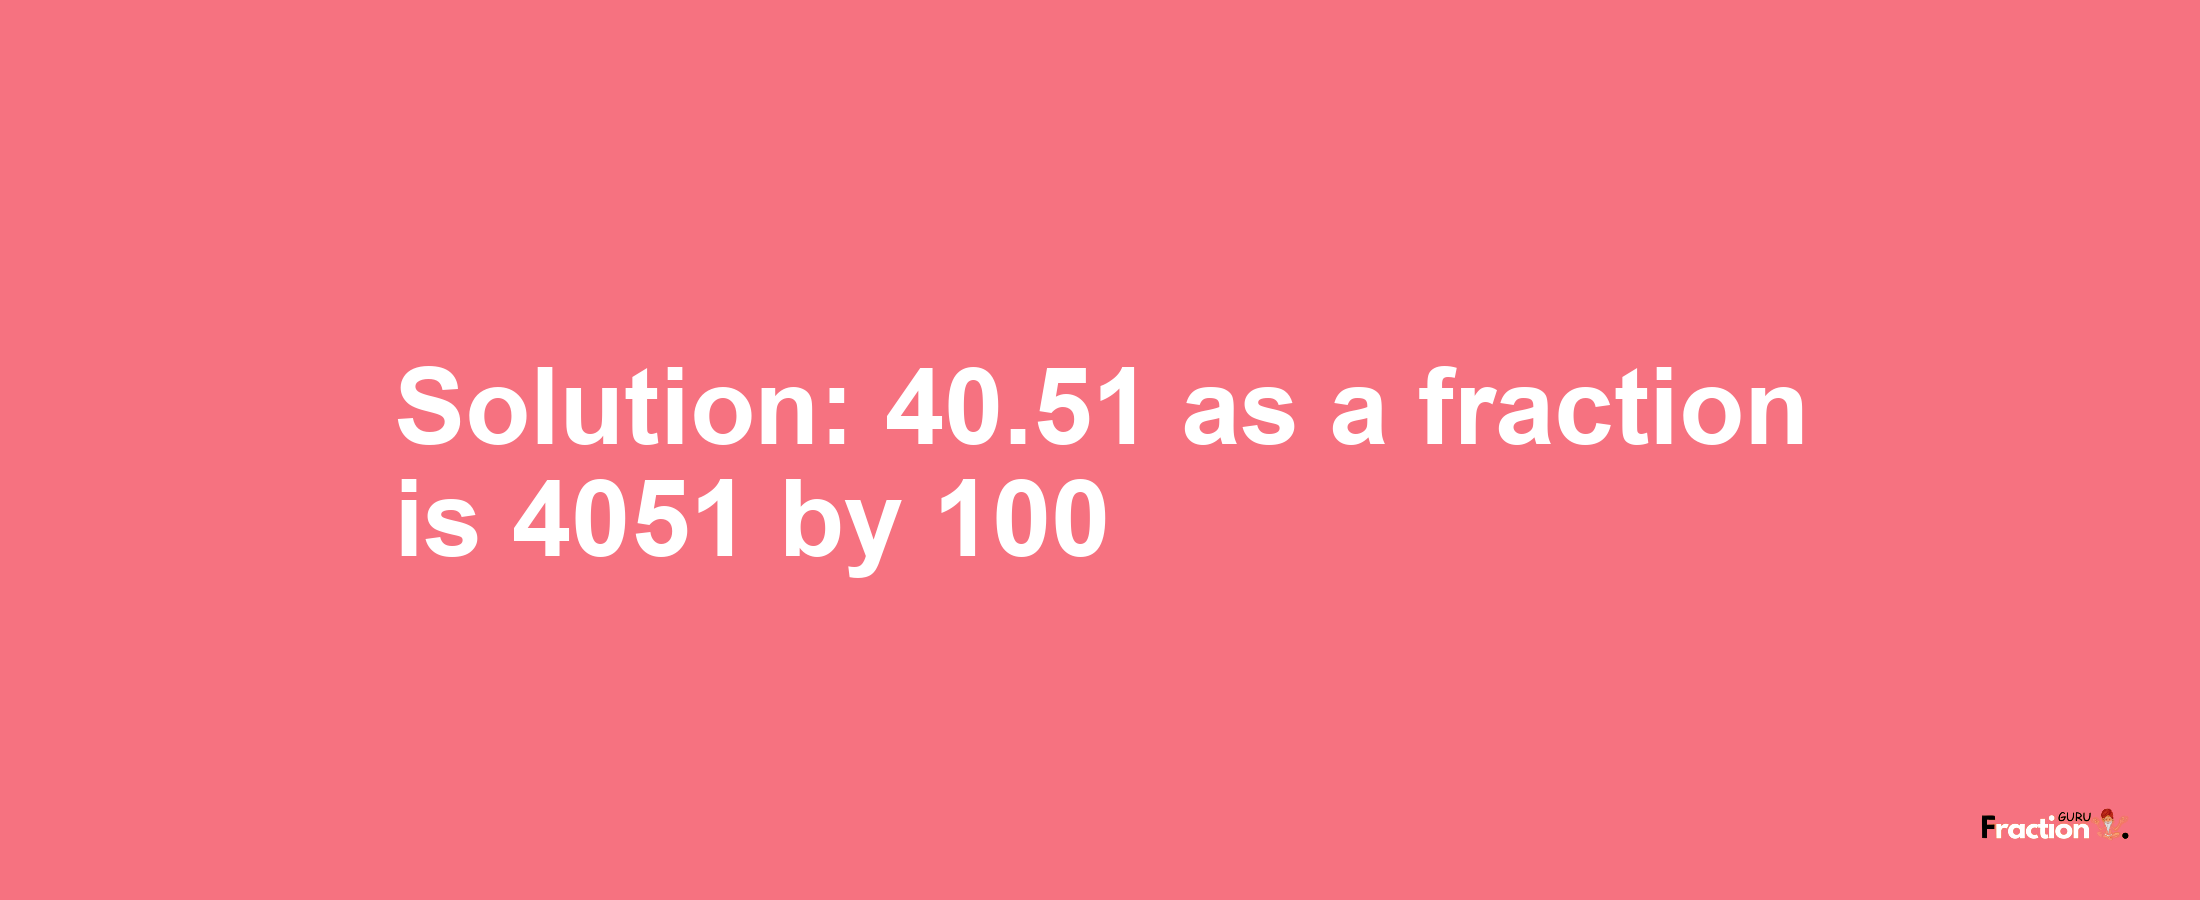 Solution:40.51 as a fraction is 4051/100